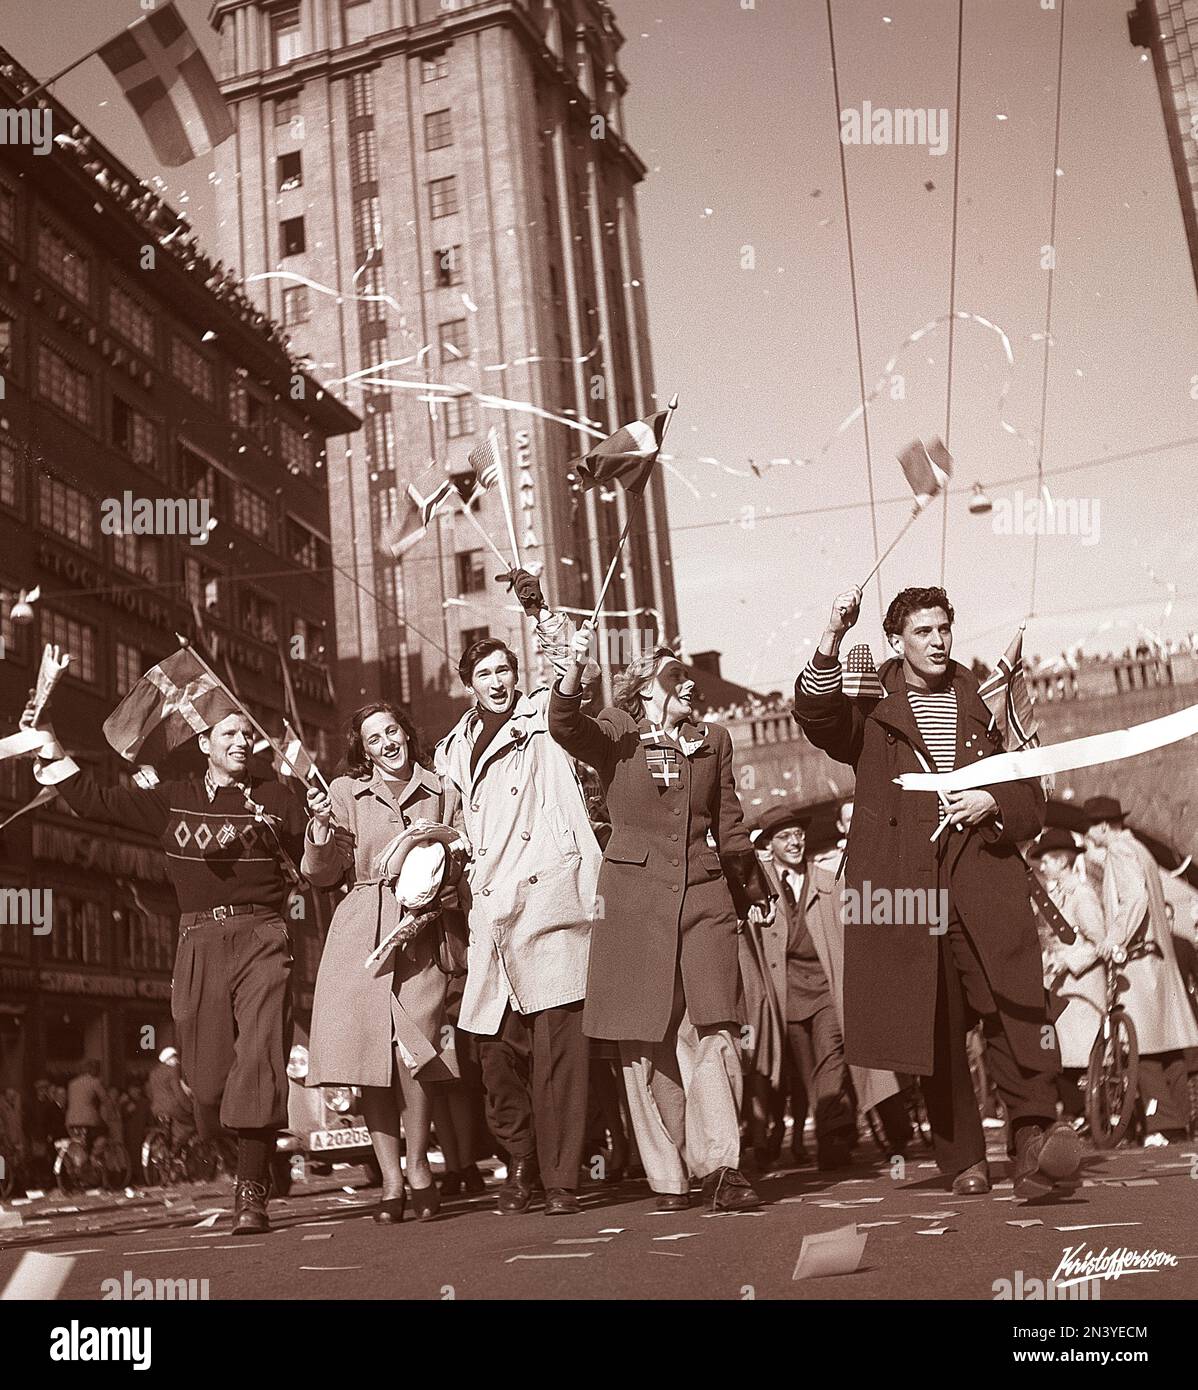 Peace celebration 1945. People of Stockholm are celebrating the end of World War II. The men and women are pictured walking on Kungsgatan on the day peace was proclamed in Europe Sweden May 7 1945s. Photo Kristoffersson N128-2 Stock Photo